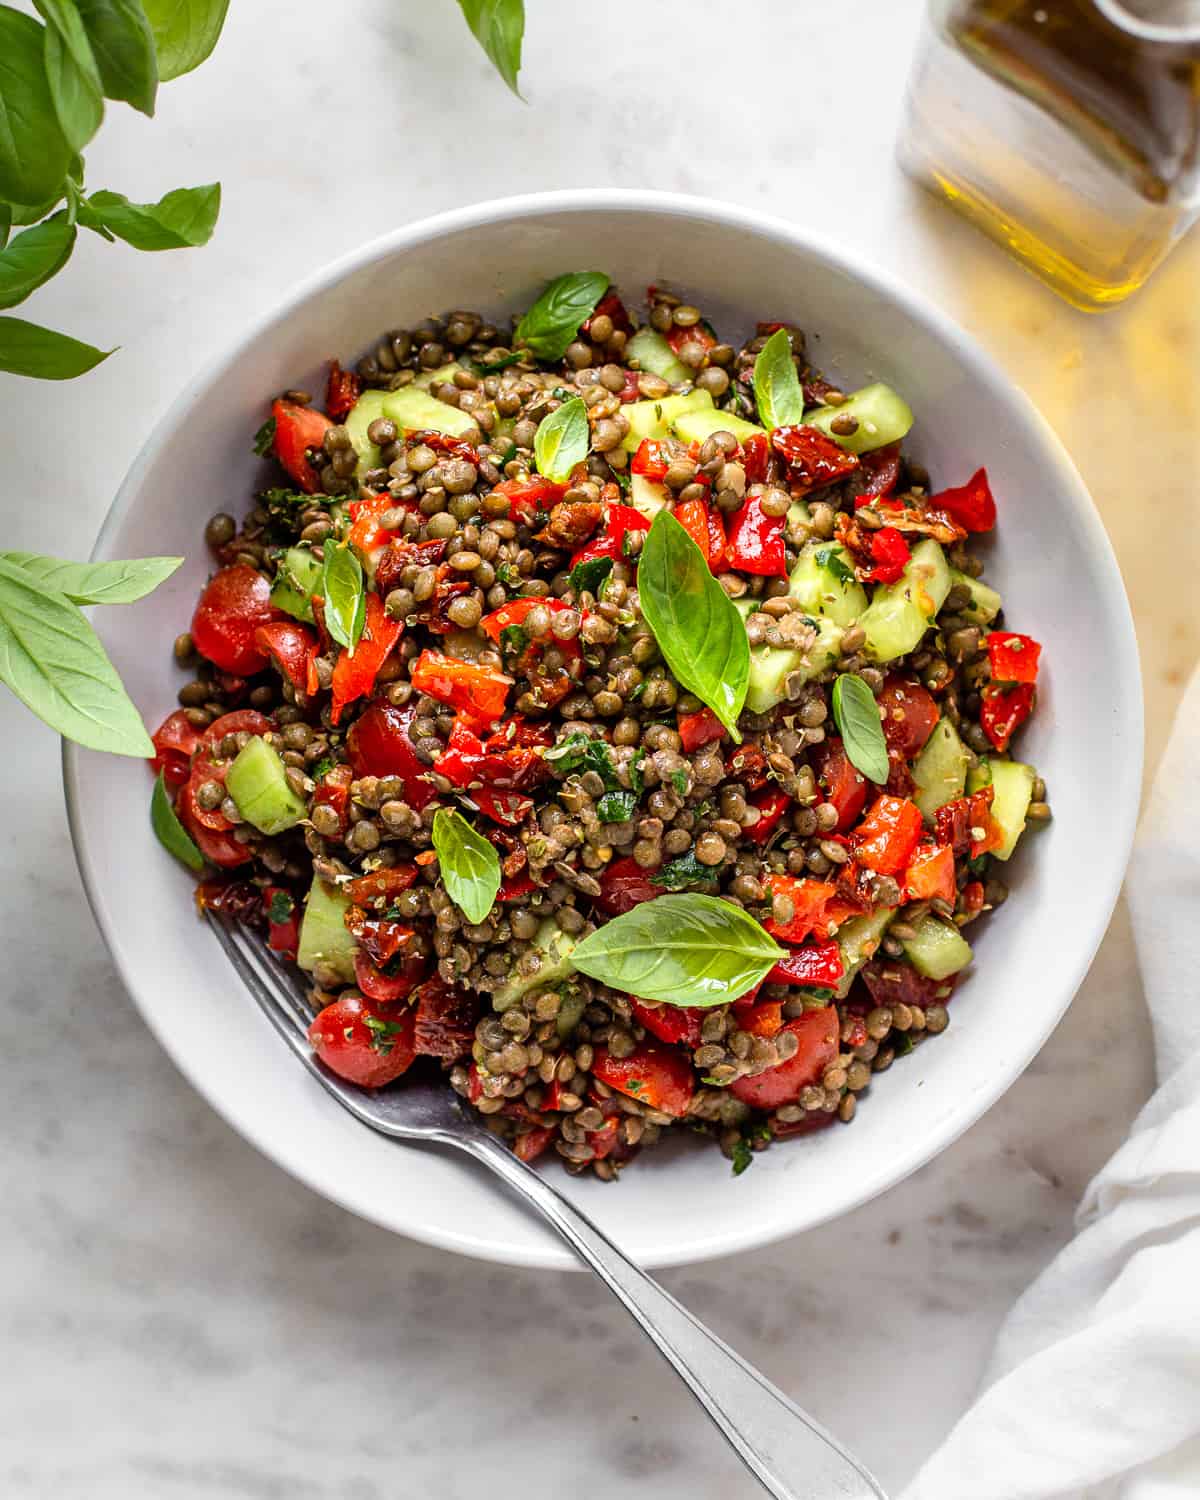 Puy lentil salad with cucumber, cherry tomatoes, fresh basil, sun-dried tomatoes, and roasted peppers.